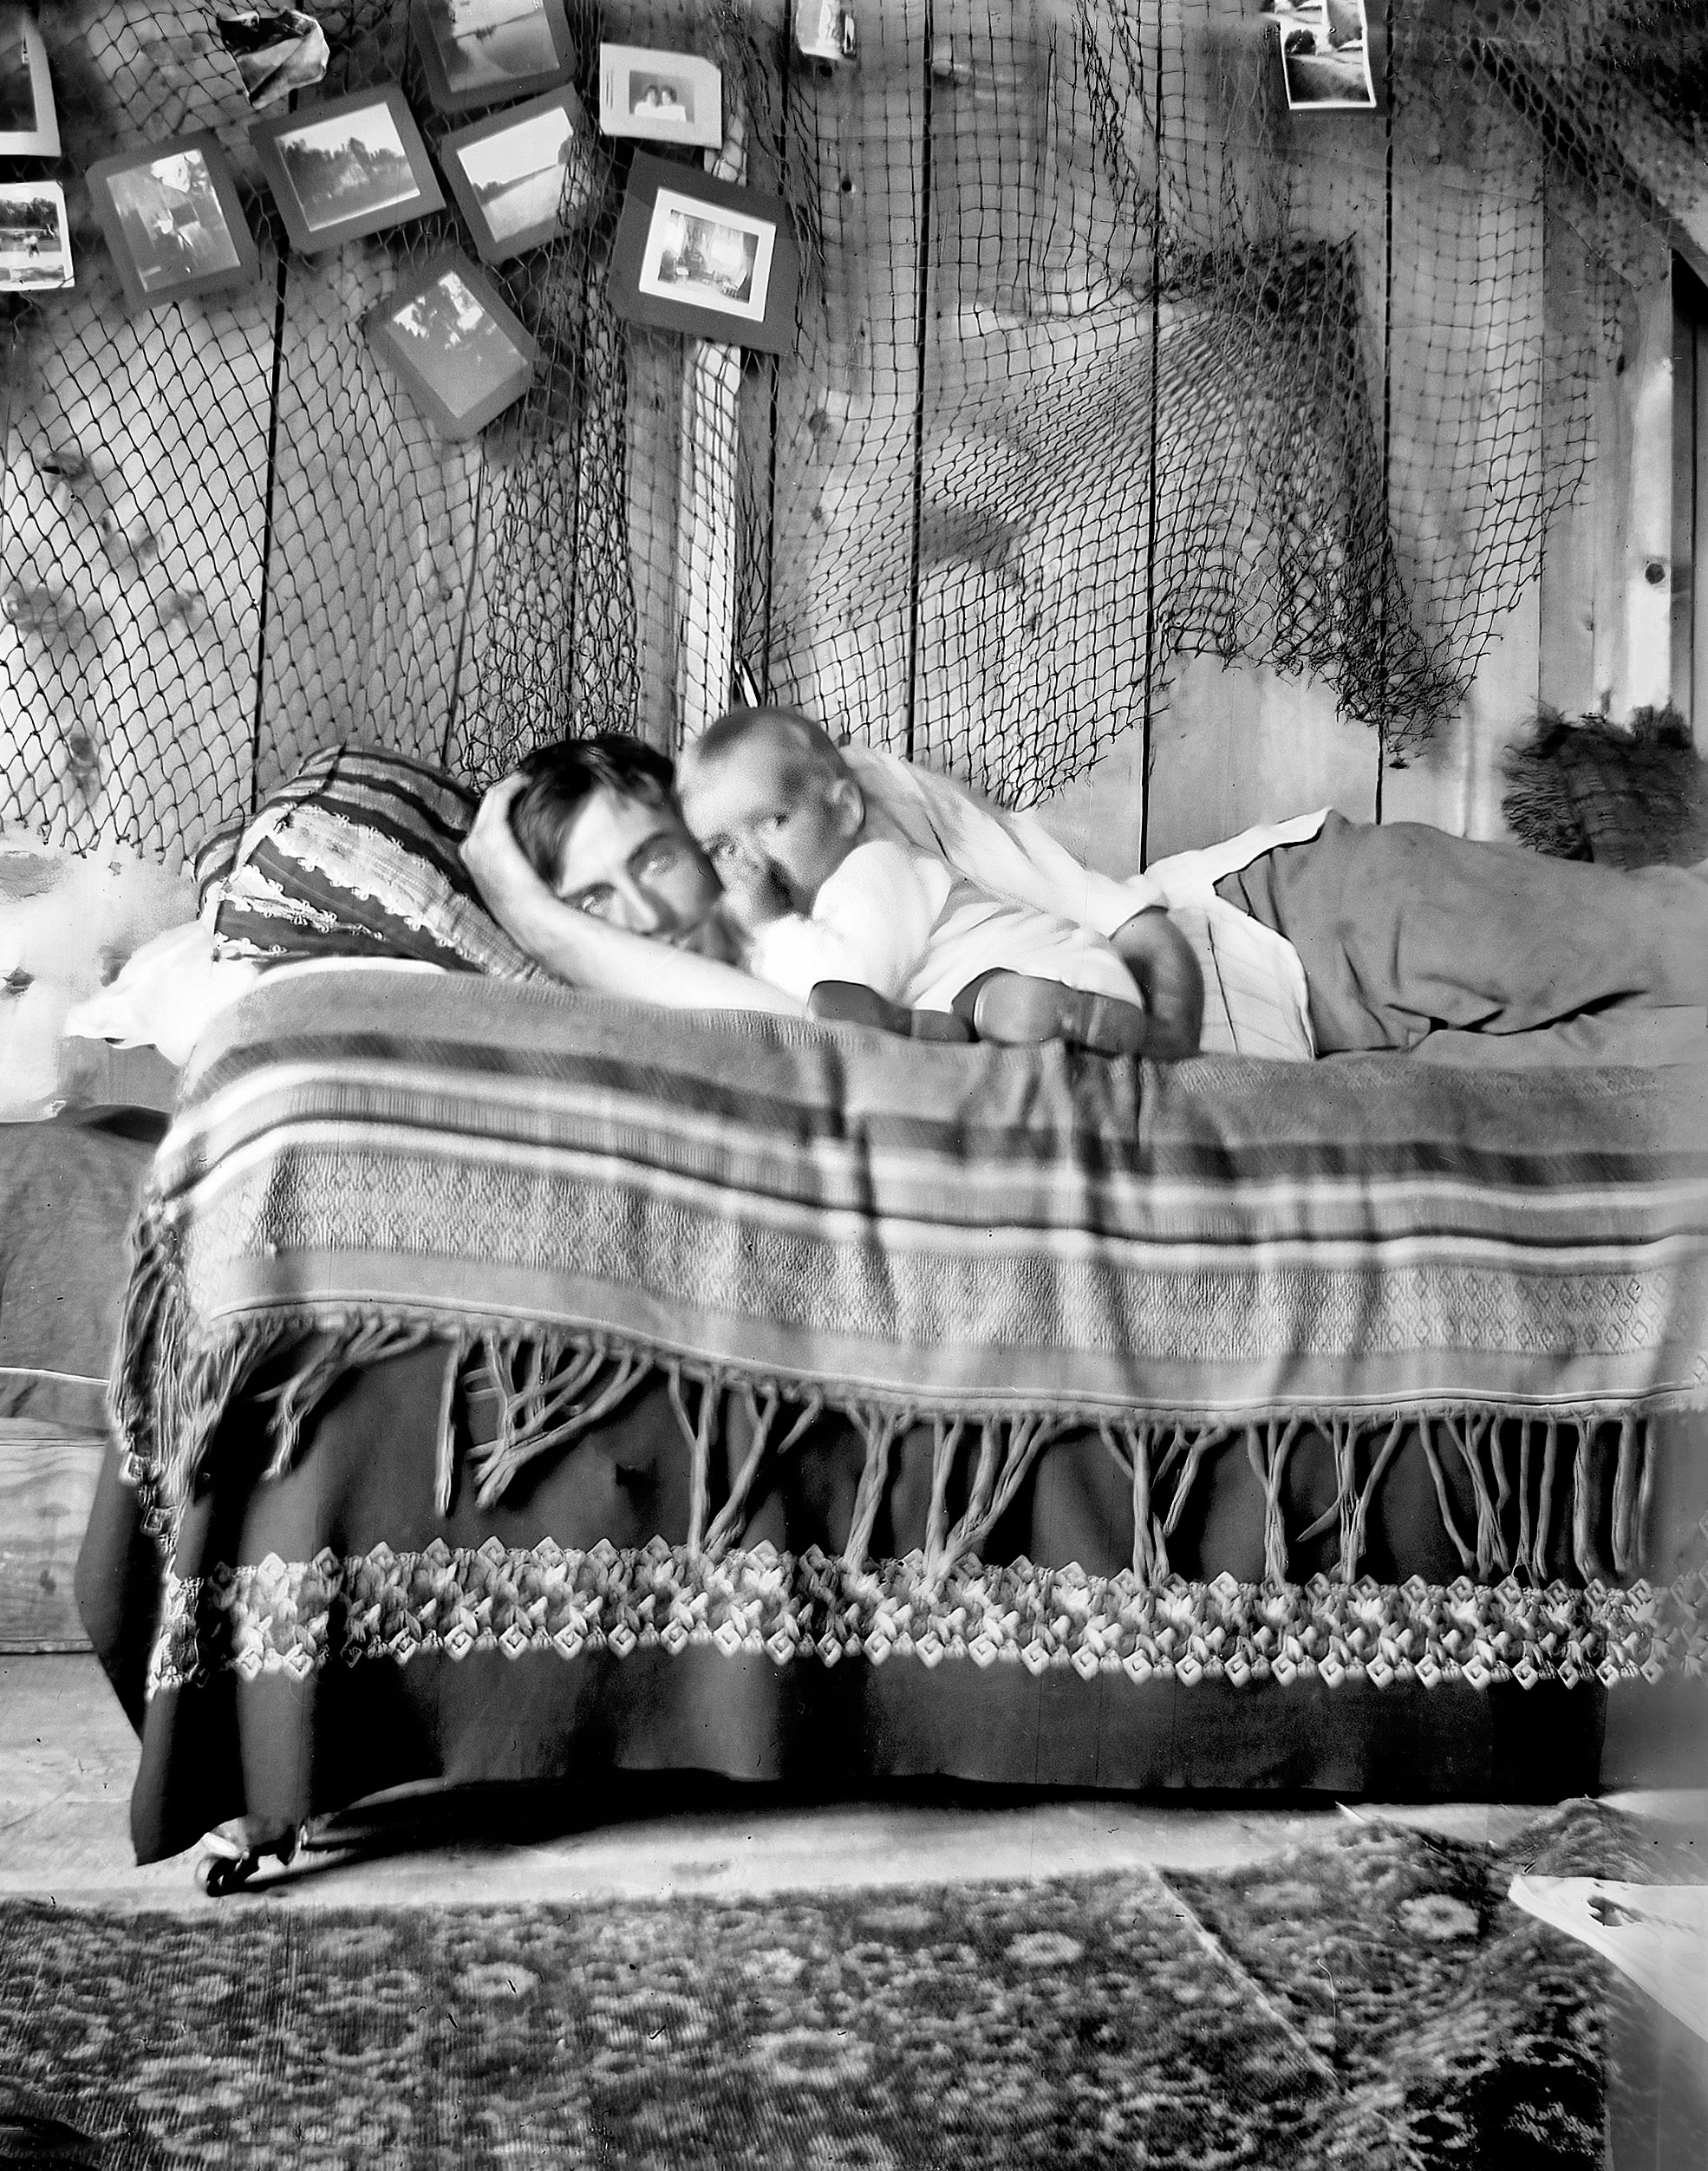 Trying to get the Li'l Cornhusker to sleep. Pawnee City, Nebraska, circa 1910 or earlier. Scanned from a 4x5 inch glass negative. View full size.